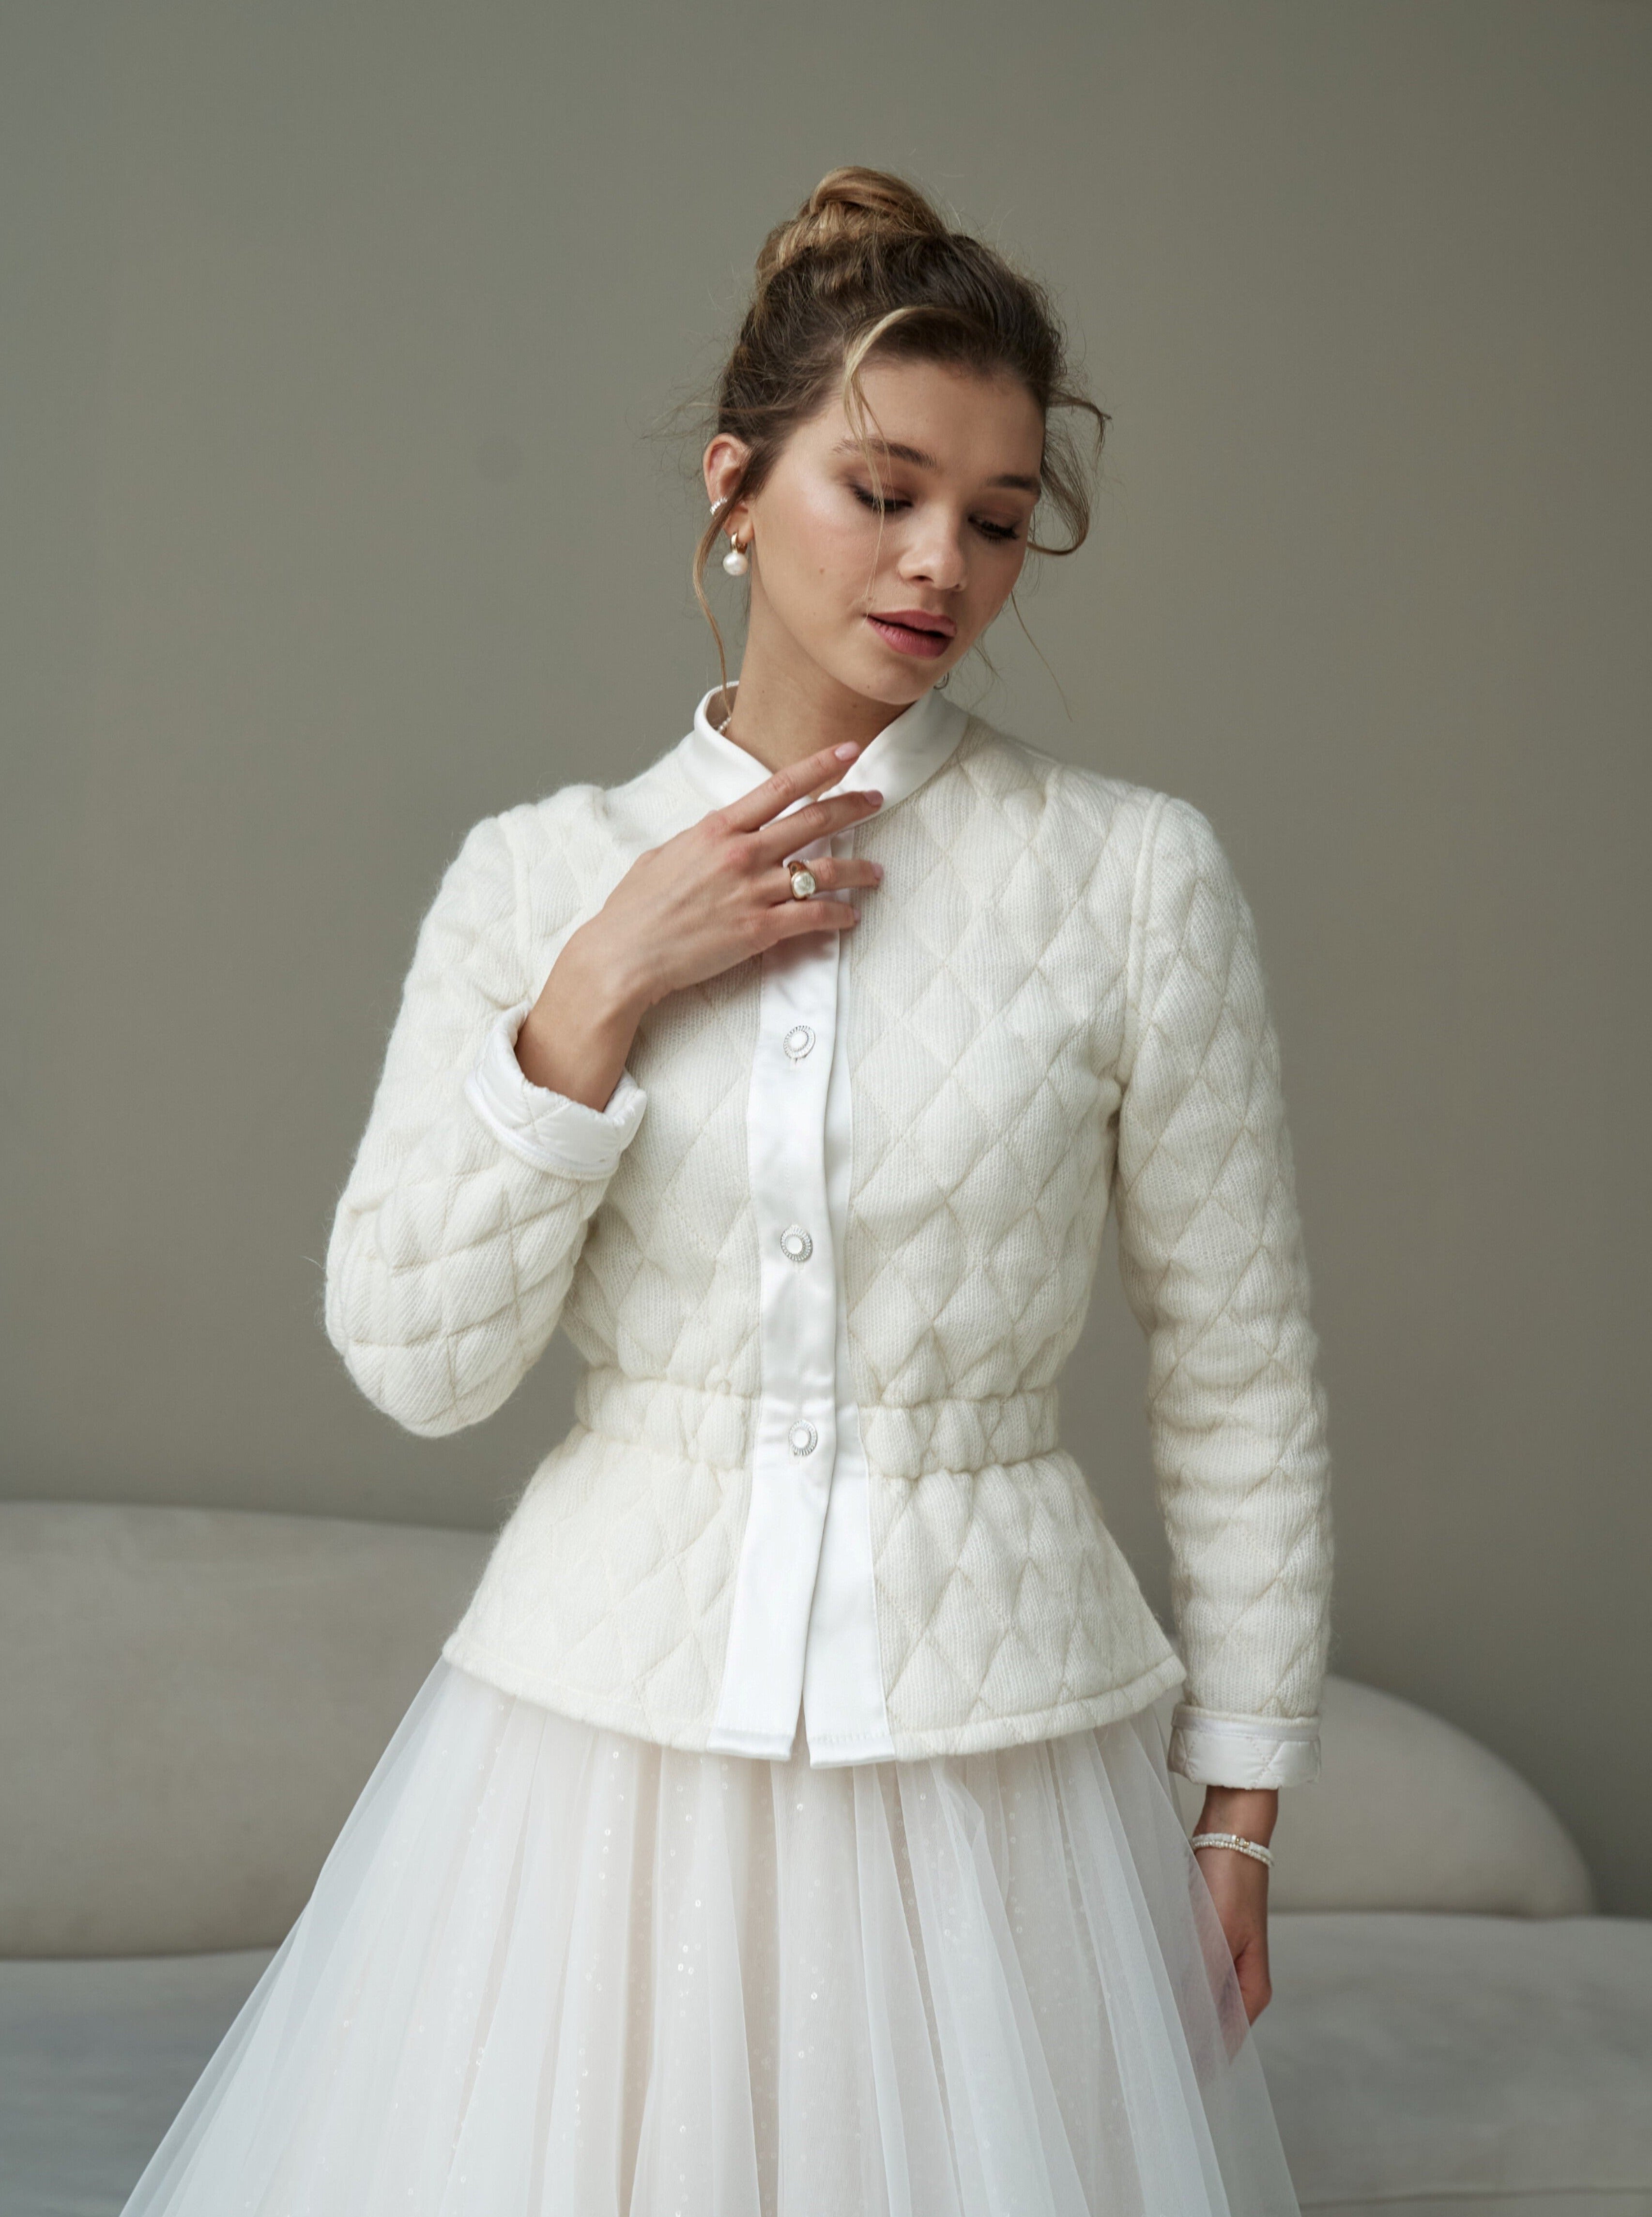 Quilted reversible jacket for bride with satin collar and buttons